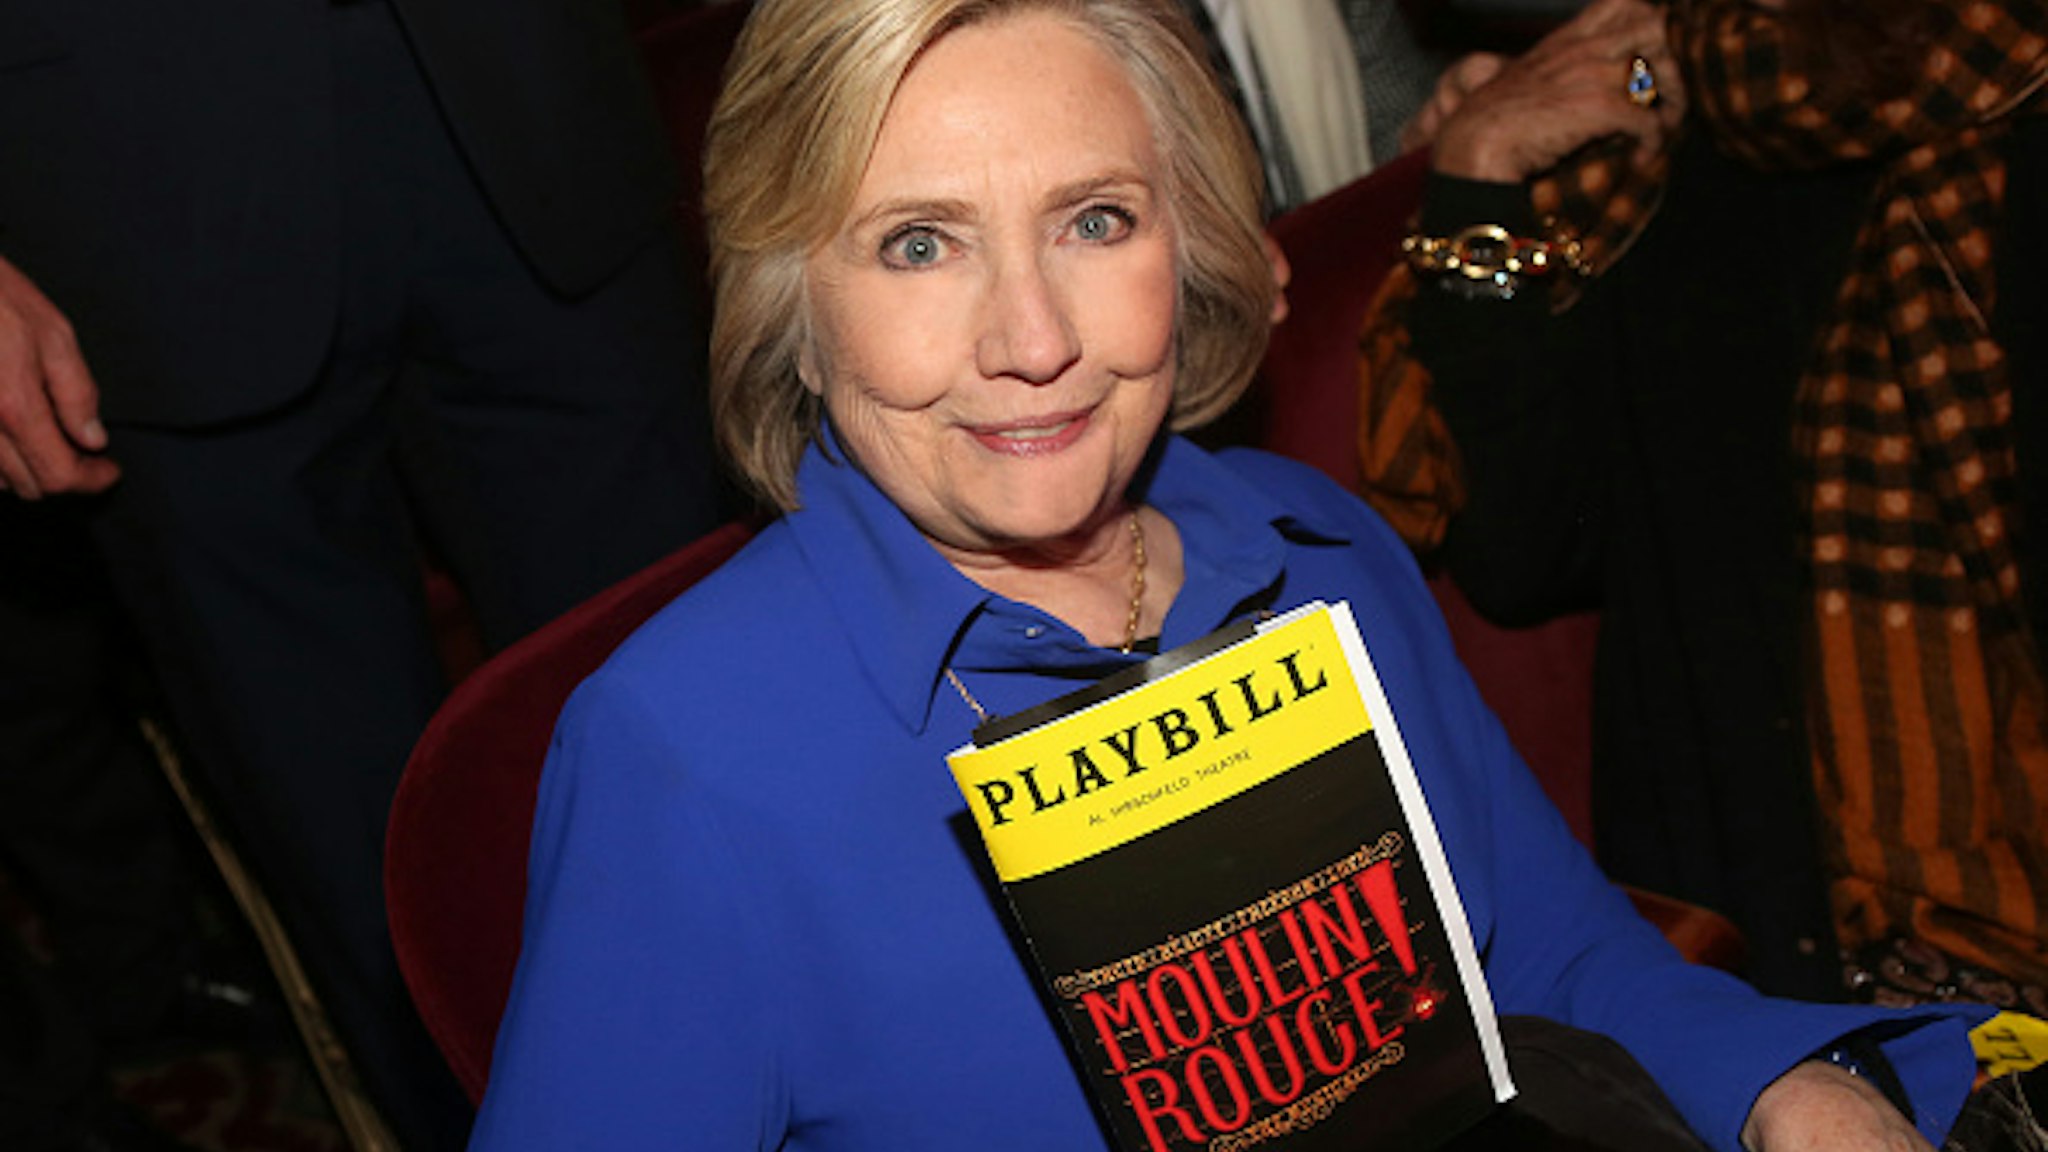 NEW YORK, NEW YORK - DECEMBER 04: (EXCLUSIVE COVERAGE) Hillary Clinton poses at "Moulin Rouge! The Musical" at The Hirshfeld Theatre on December 4, 2019 in New York City.